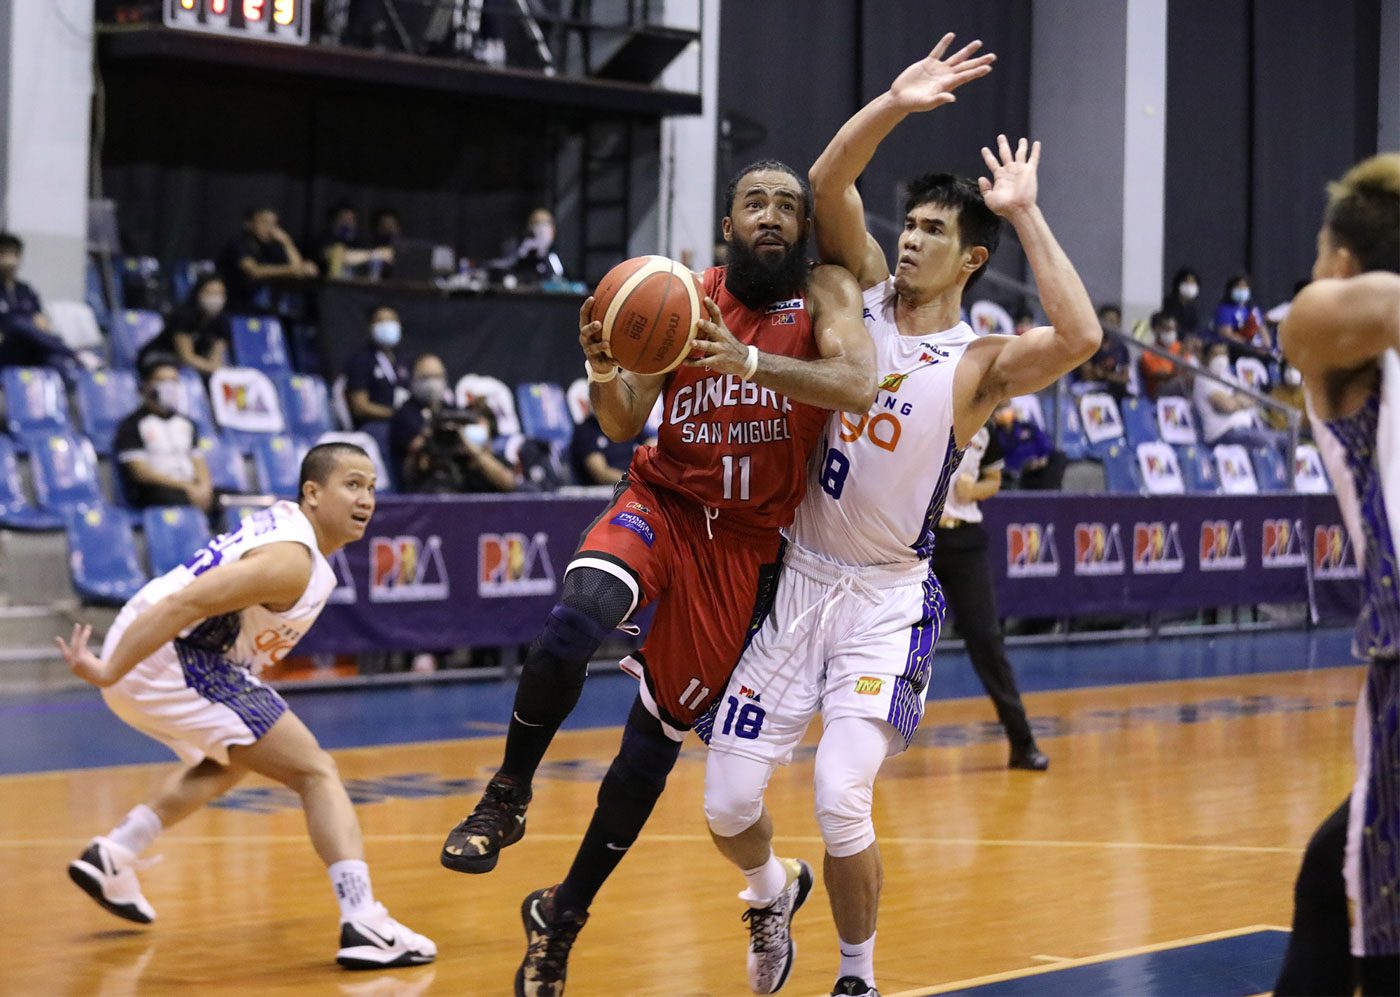 PBA gets go signal to resume Philippine Cup in Pampanga